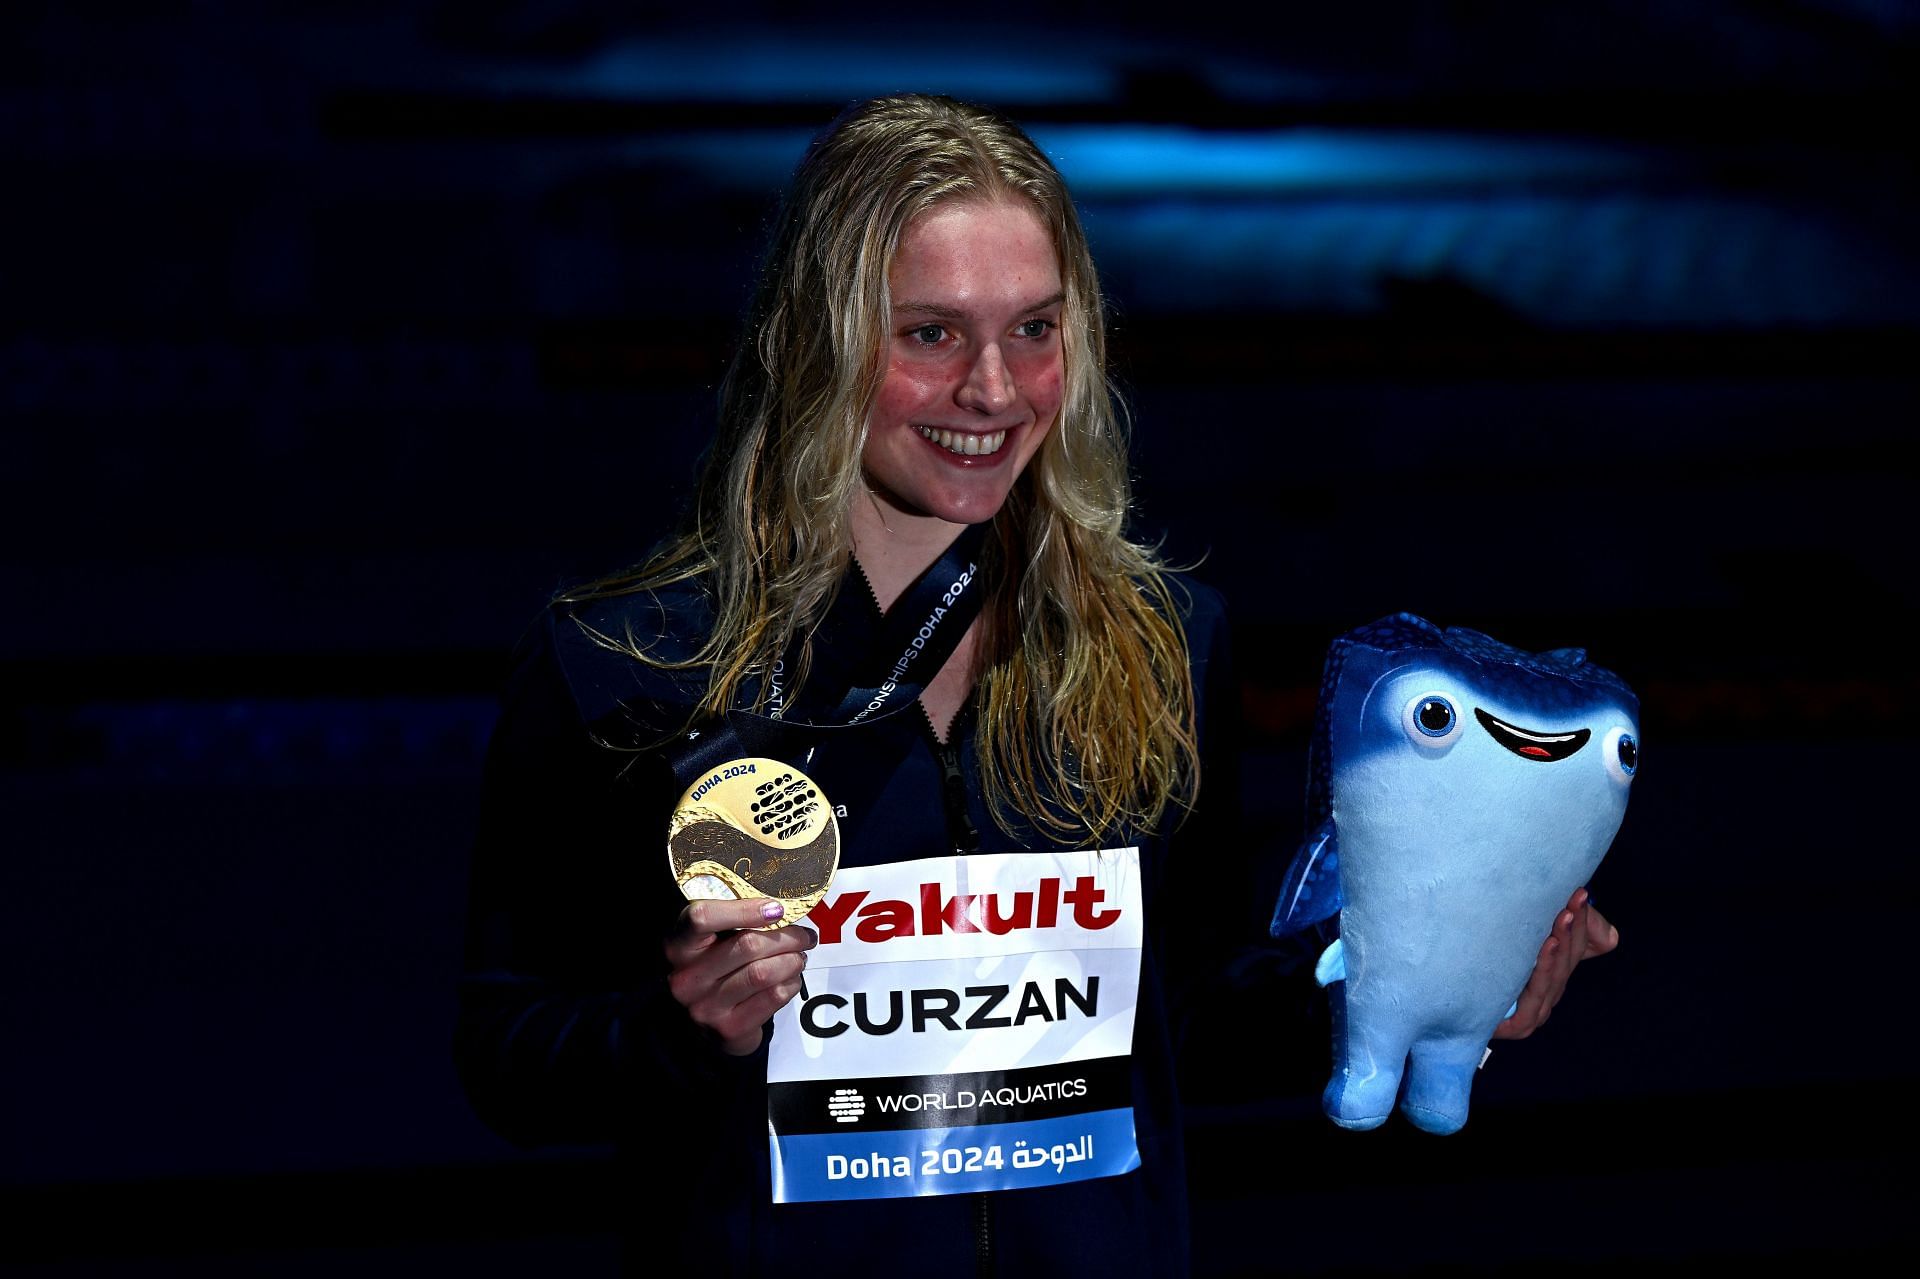 Claire Curzan poses with her gold medal after the Medal Ceremony for the Women&#039;s 50m Backstroke Final at the 2024 World Aquatics Championships at Aspire Dome in Doha, Qatar.